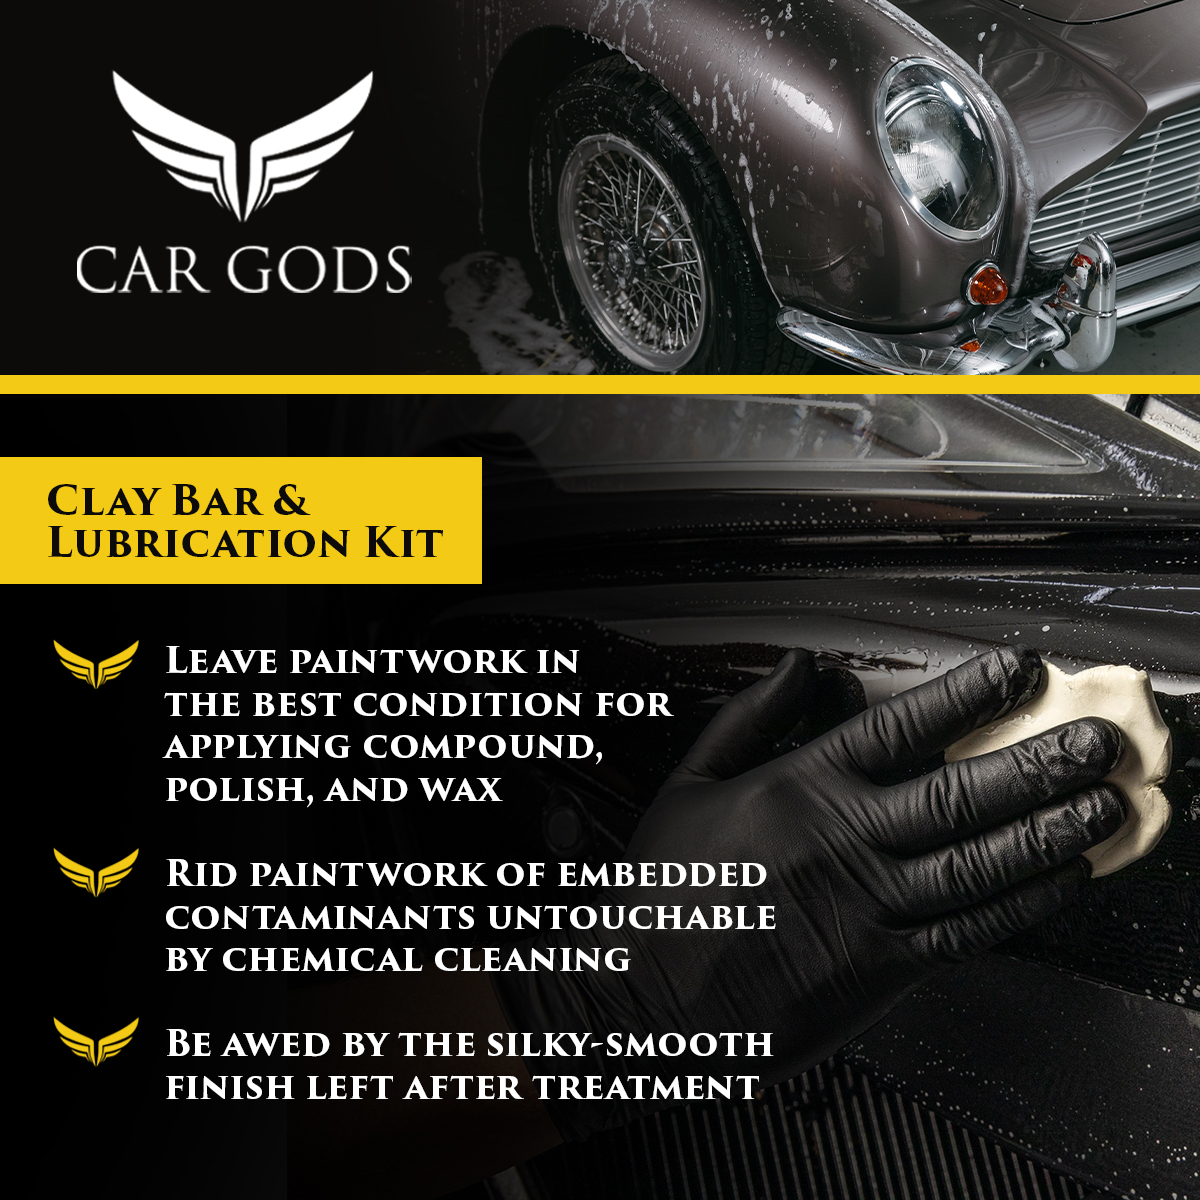 Car Gods Clay Bar and Lubrication kit. Remove embedded paintwork contaminants for a silky-smooth finish. Car body panels will be ready for sealant and wax layers after use for the ultimate paintwork finish.